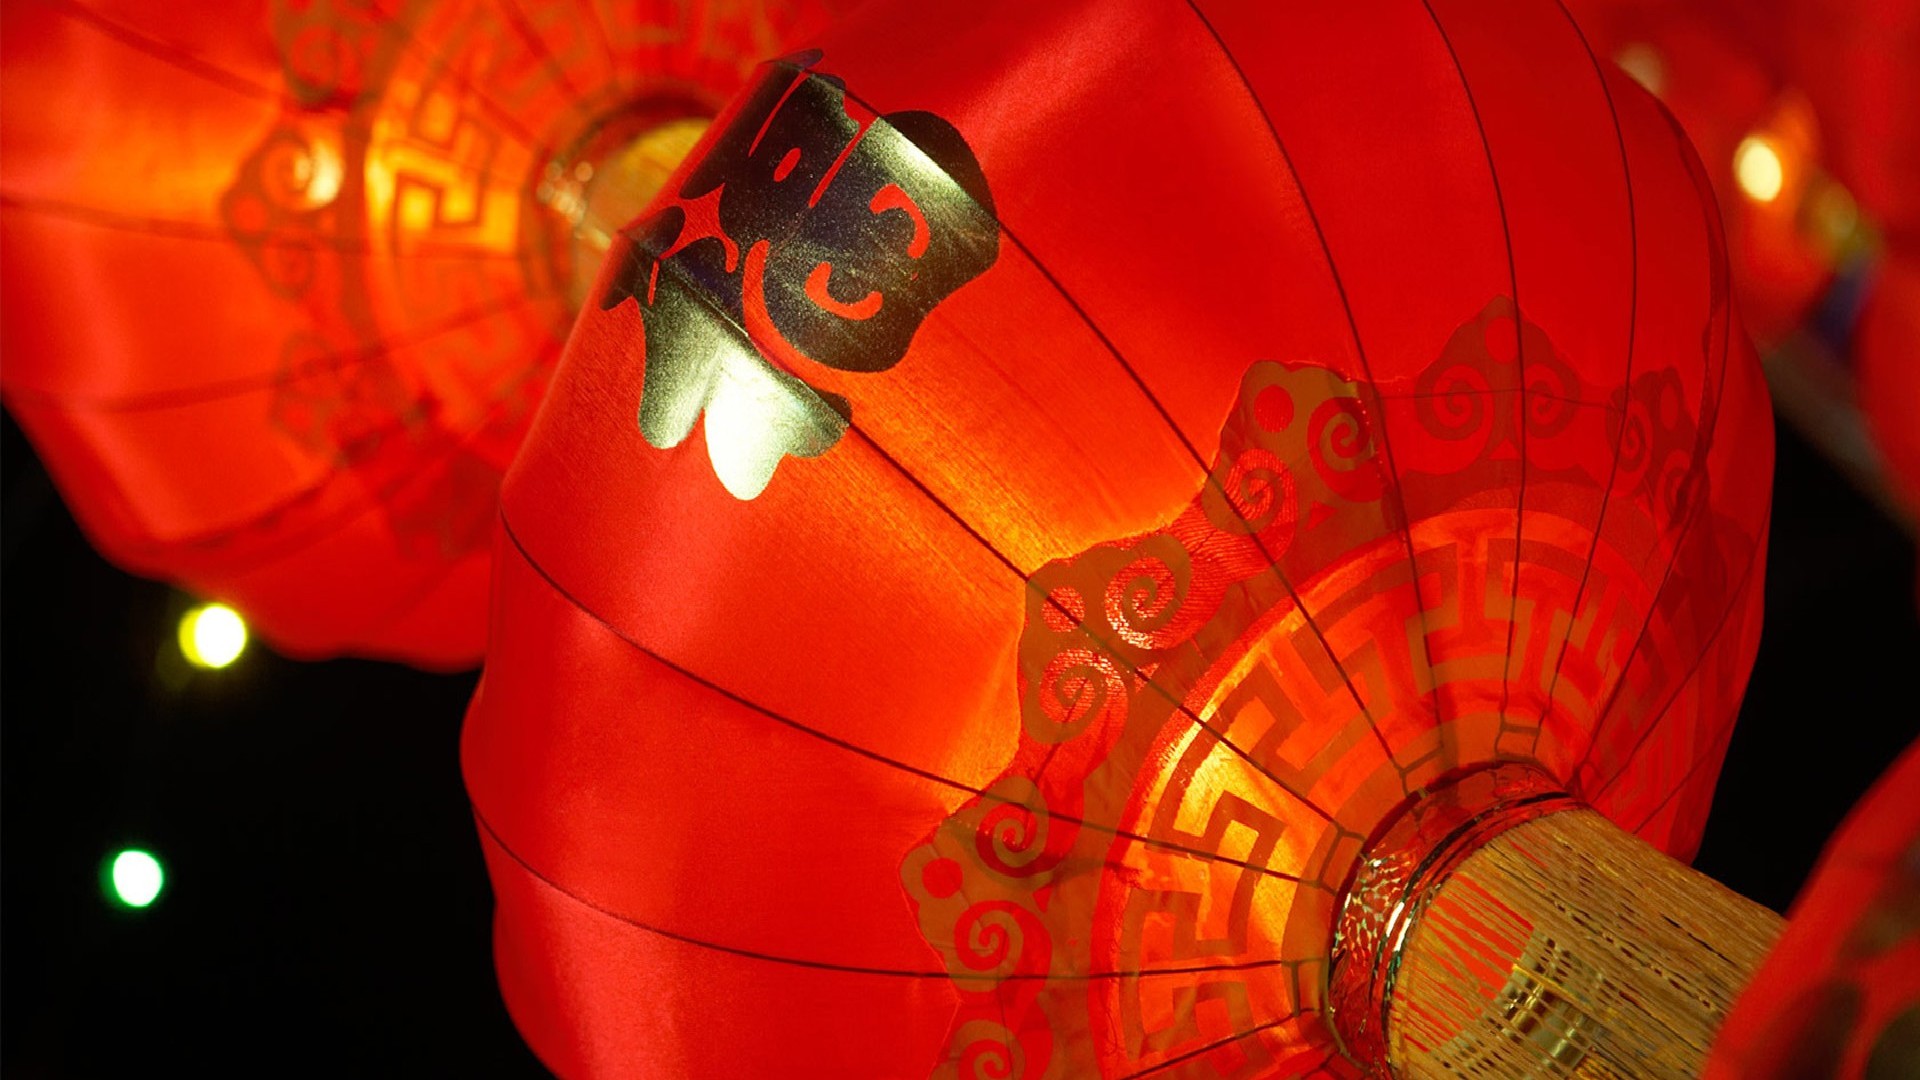 Chinese New Year 2014 Wallpapers   Wallpaper High Definition High